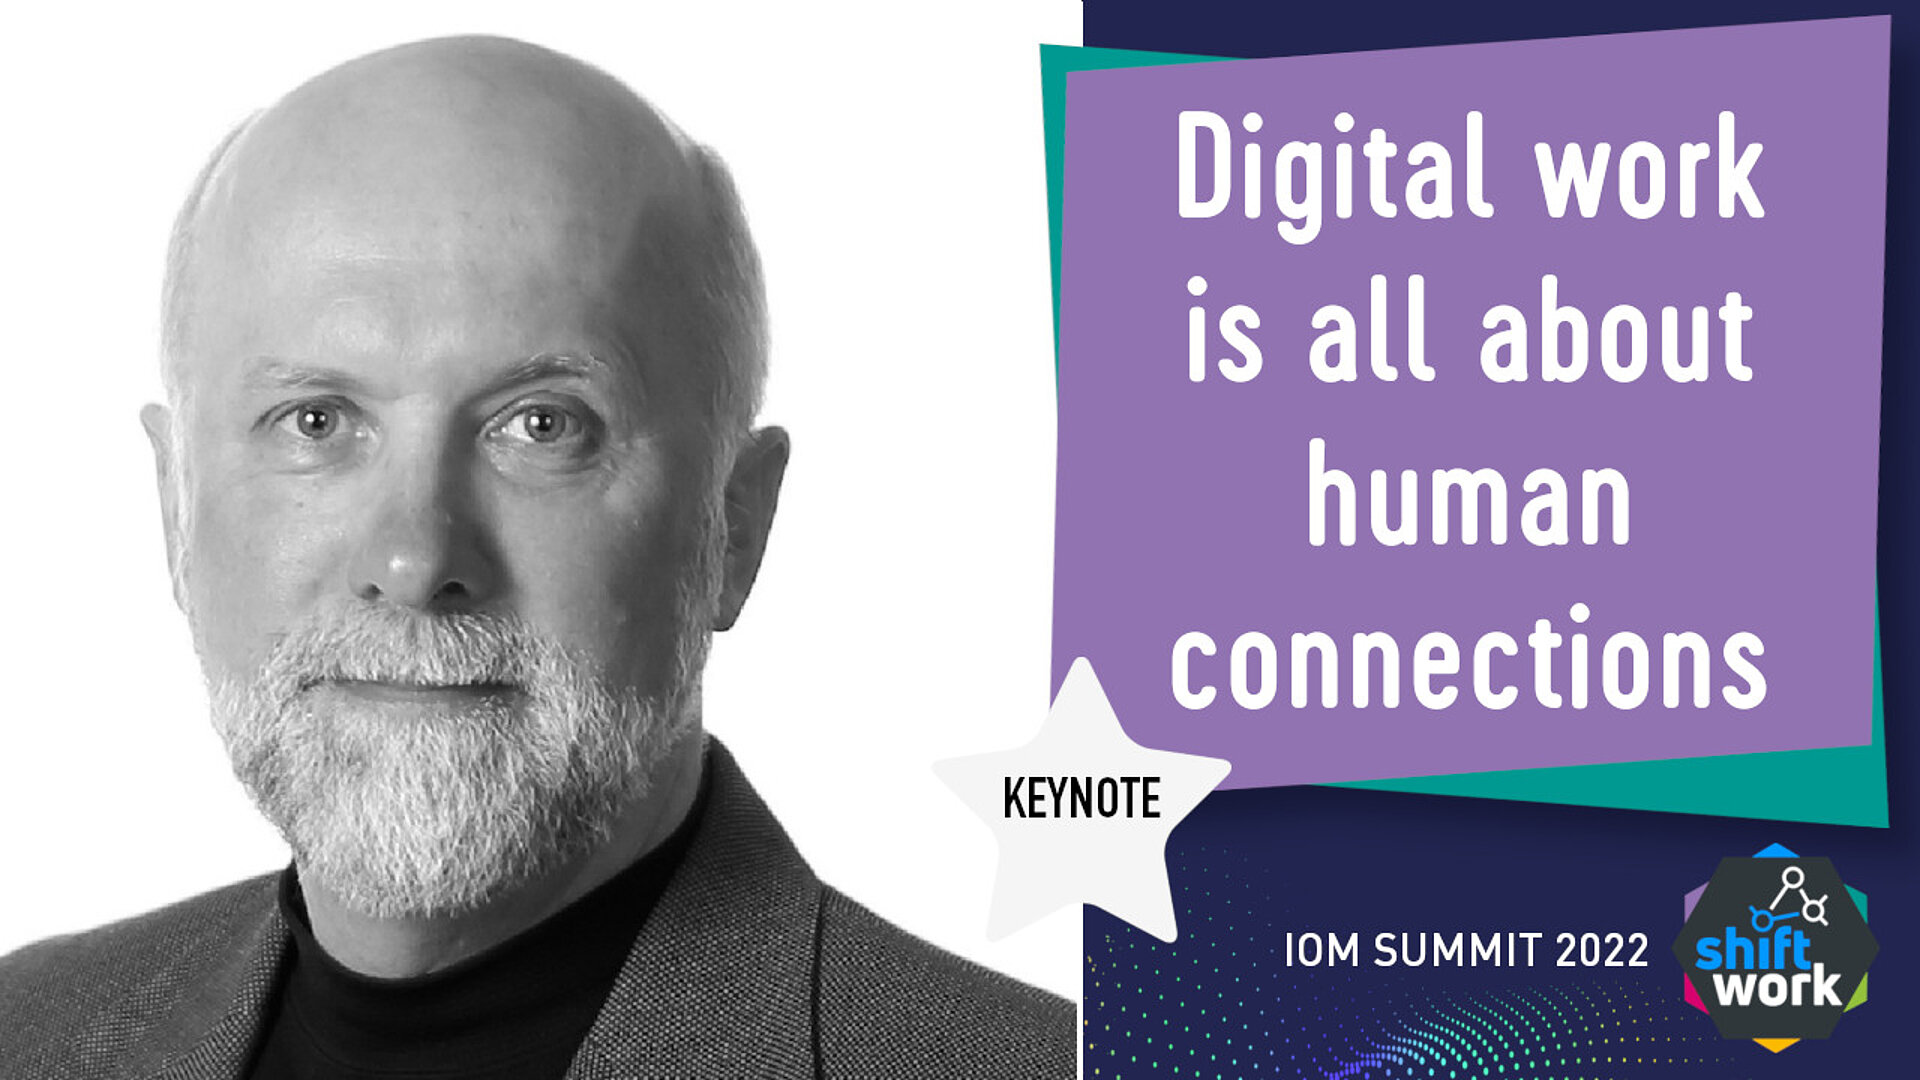 Digital work is all about human connections